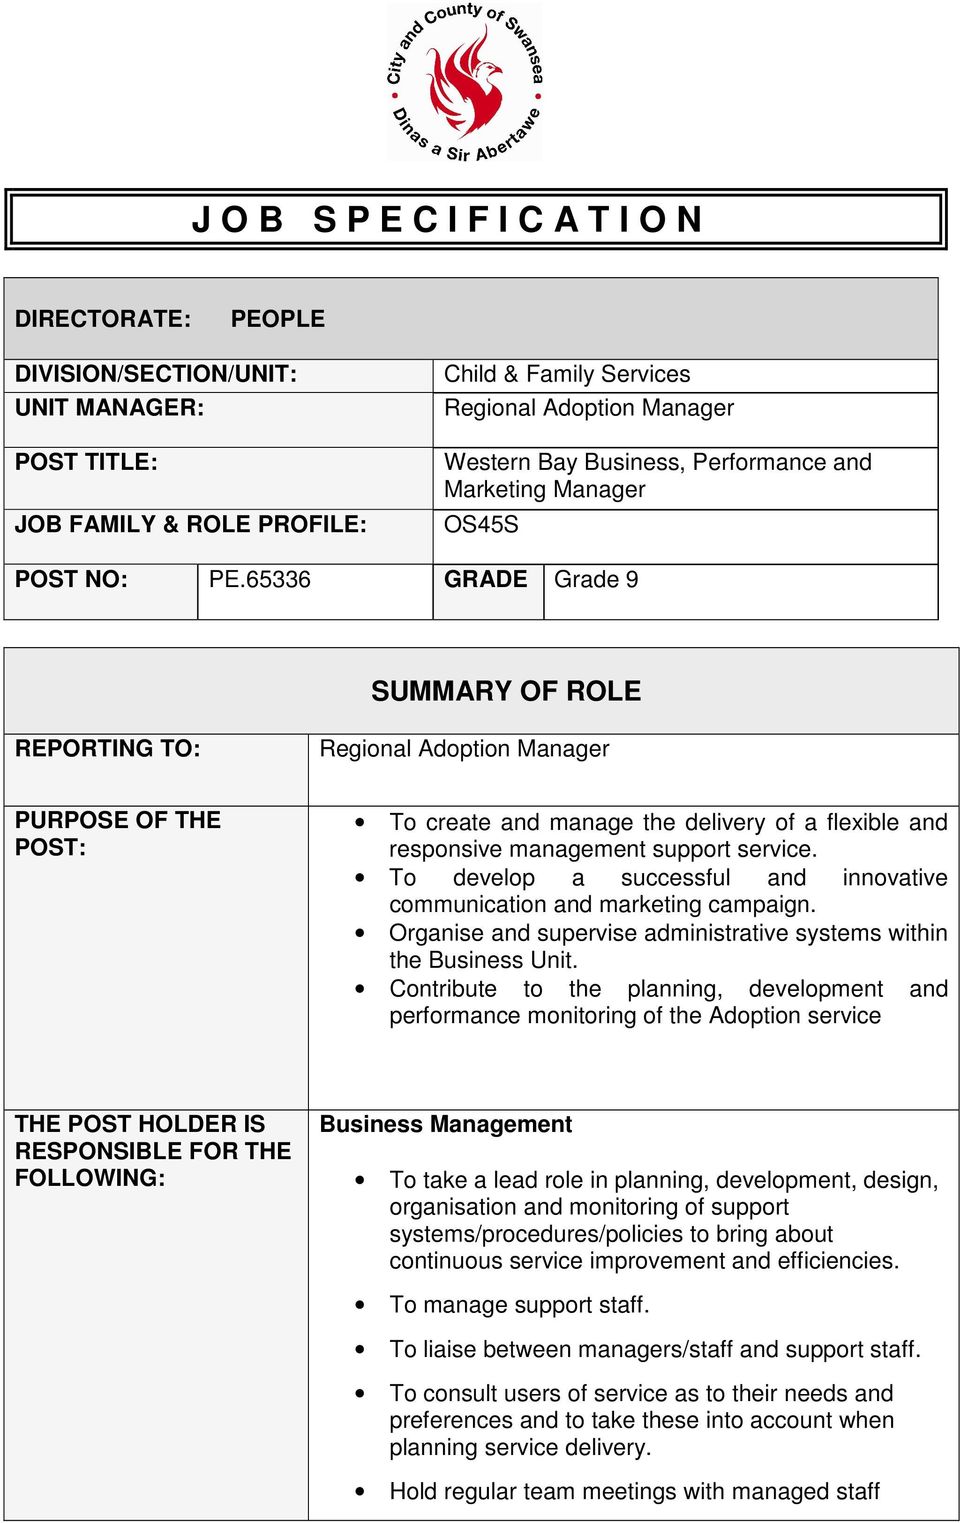 65336 GRADE Grade 9 SUMMARY OF ROLE REPORTING TO: Regional Adoption Manager PURPOSE OF THE POST: To create and manage the delivery of a flexible and responsive management support service.